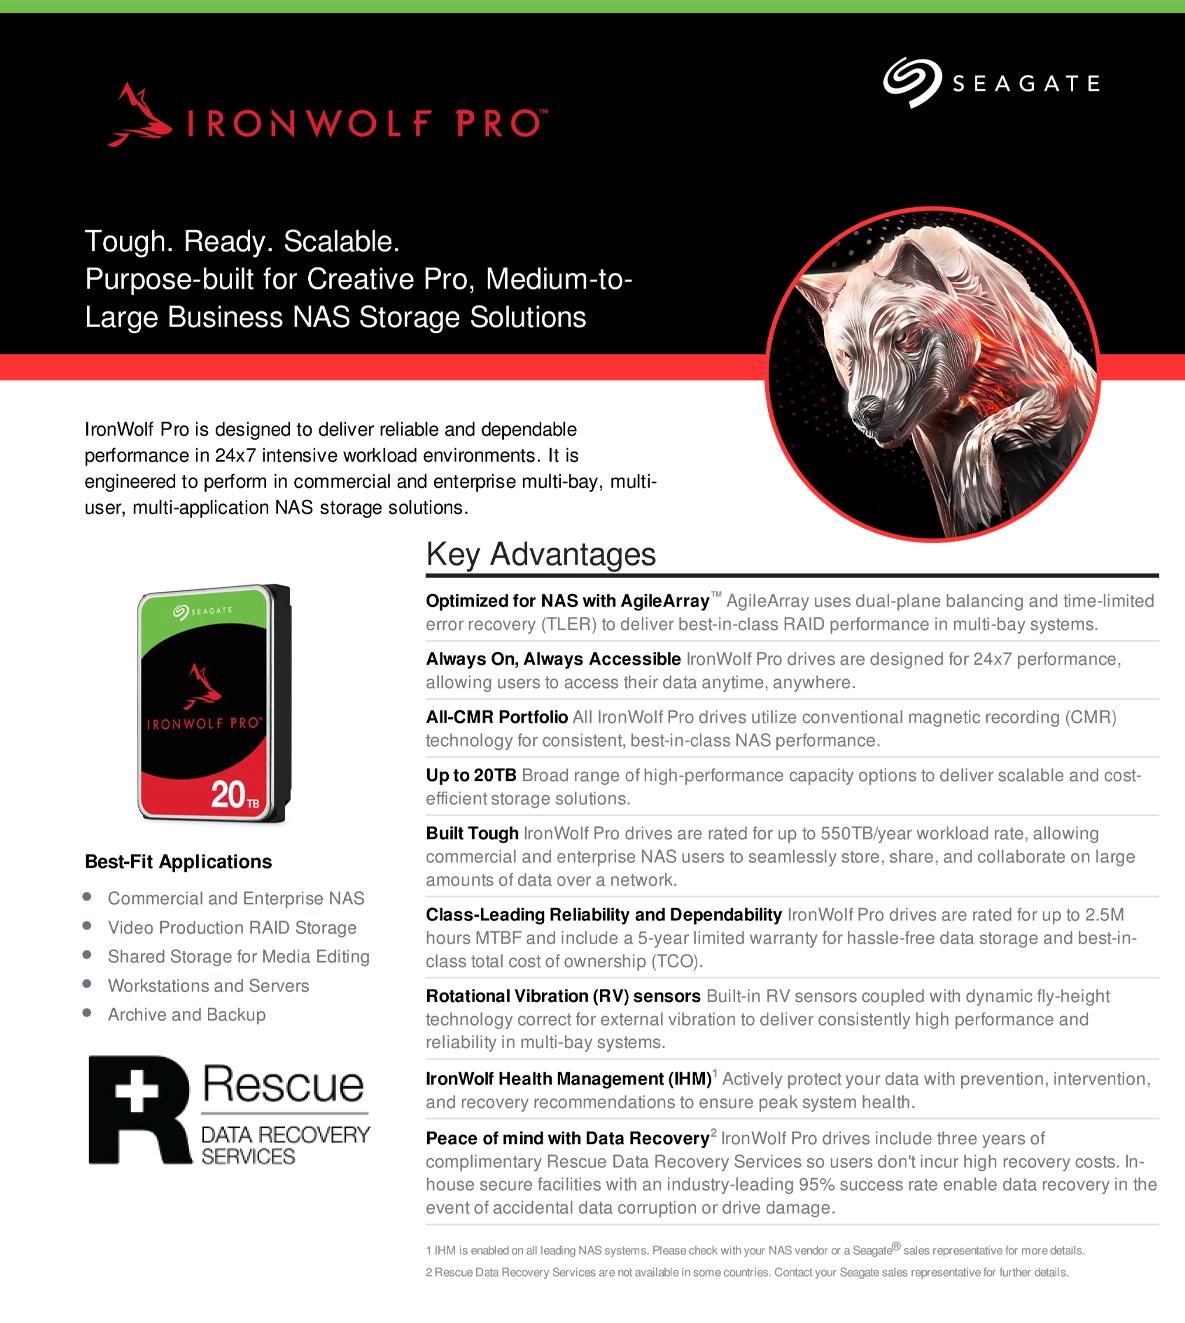 A large marketing image providing additional information about the product Seagate IronWolf Pro 3.5" NAS HDD - 10TB 256MB - Additional alt info not provided